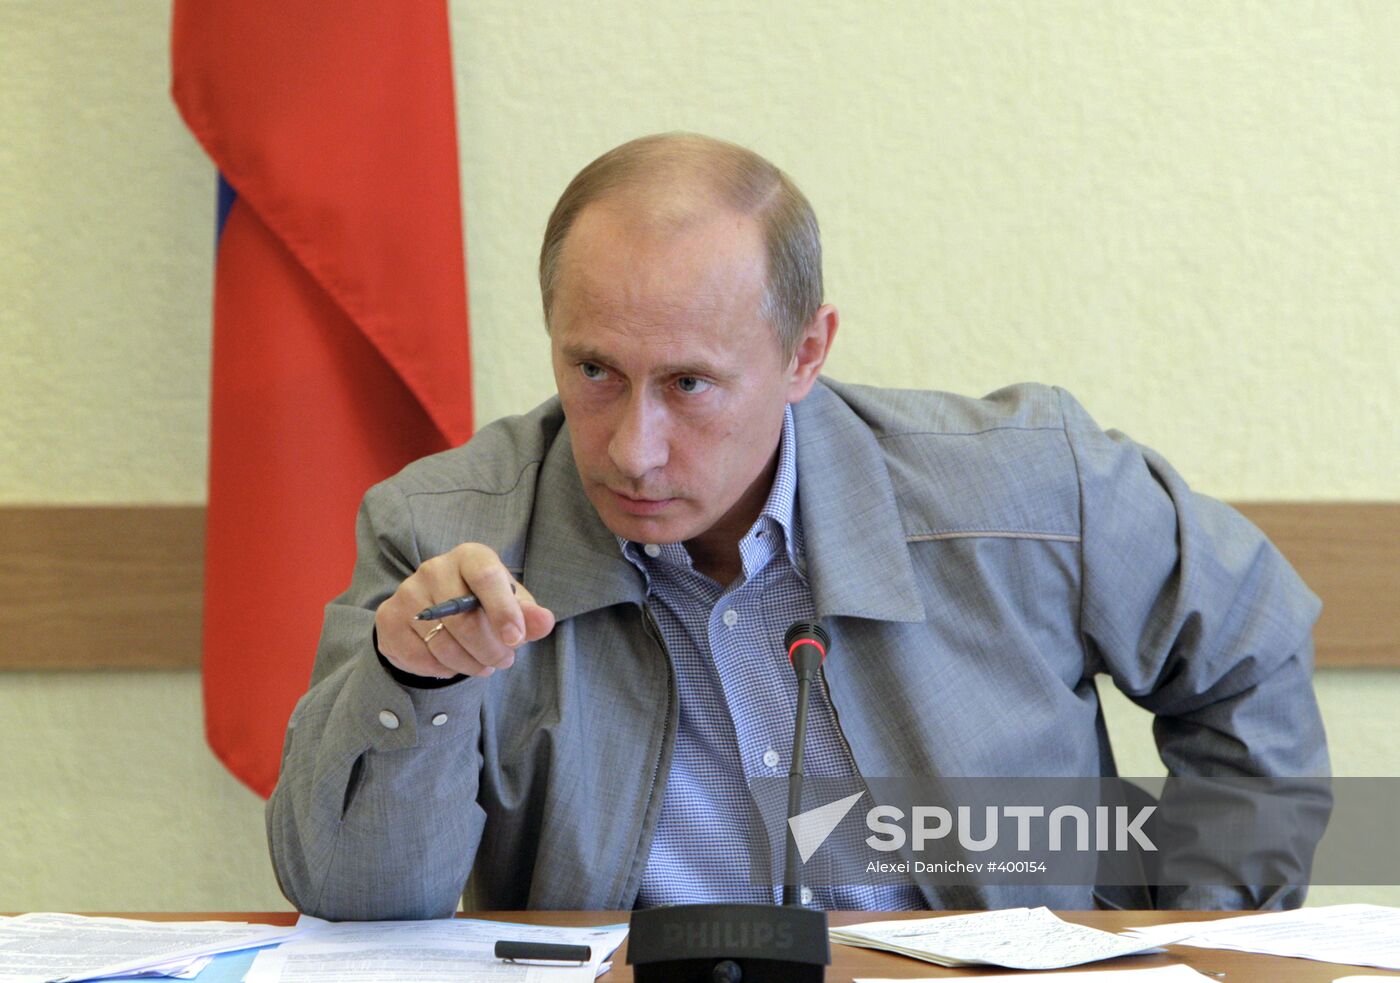 Prime Minister Vladimir Putin conducts meeting in Pikalyovo